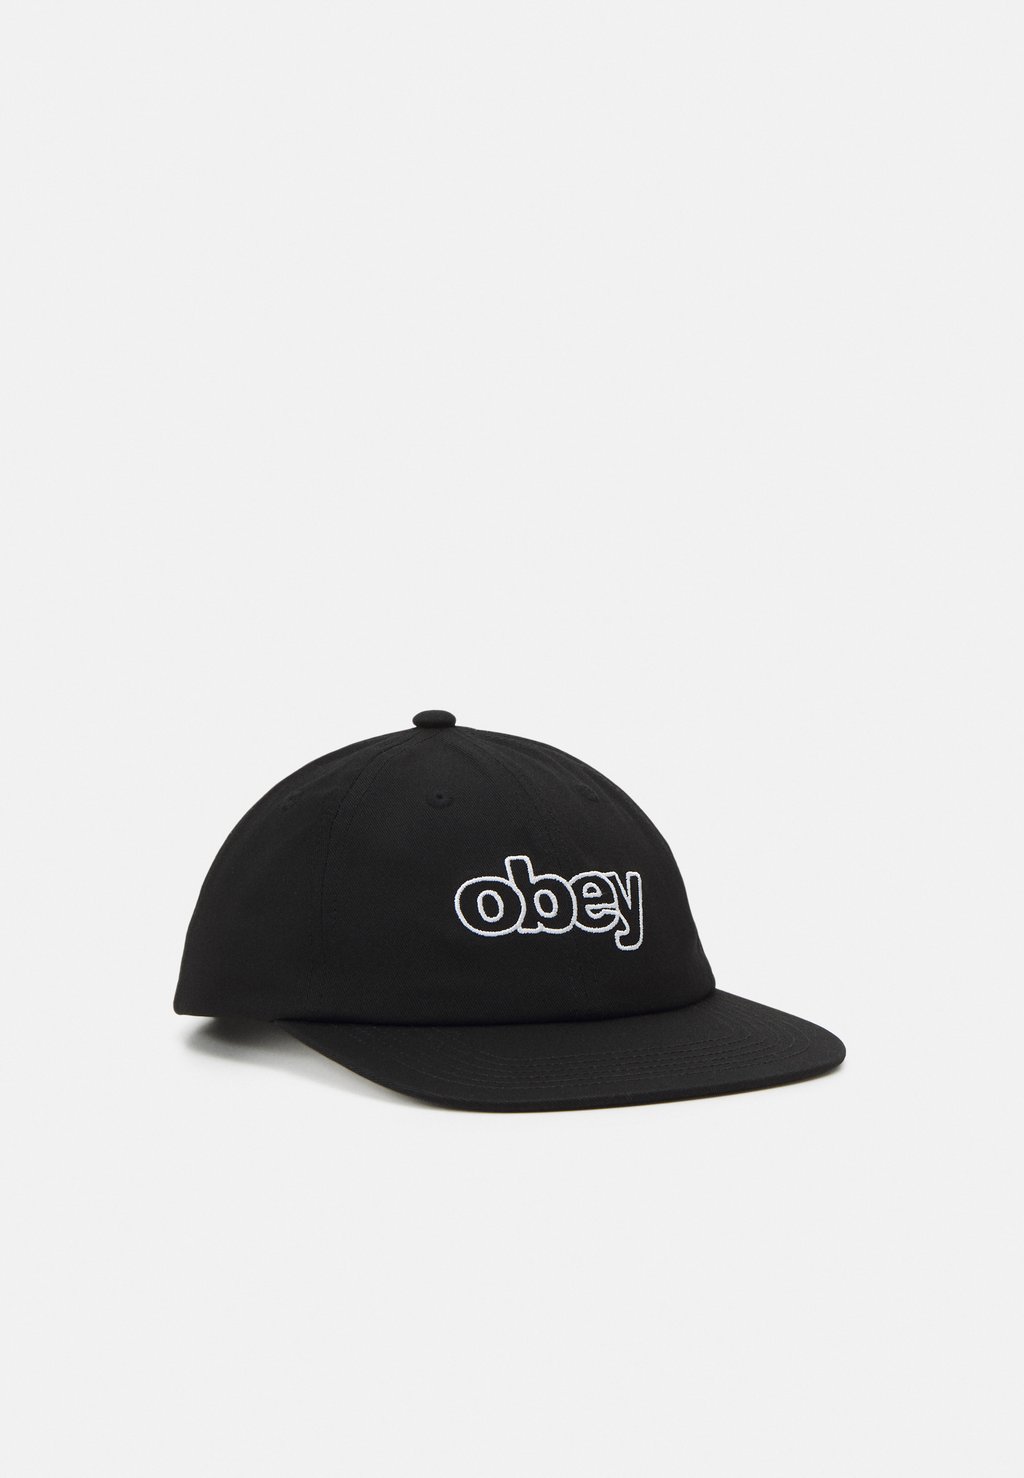 Кепка Obey Clothing OBEY SELECT 6 PANEL SNAPBACK, черный кепка obey pigment lowercase 6 panel teal